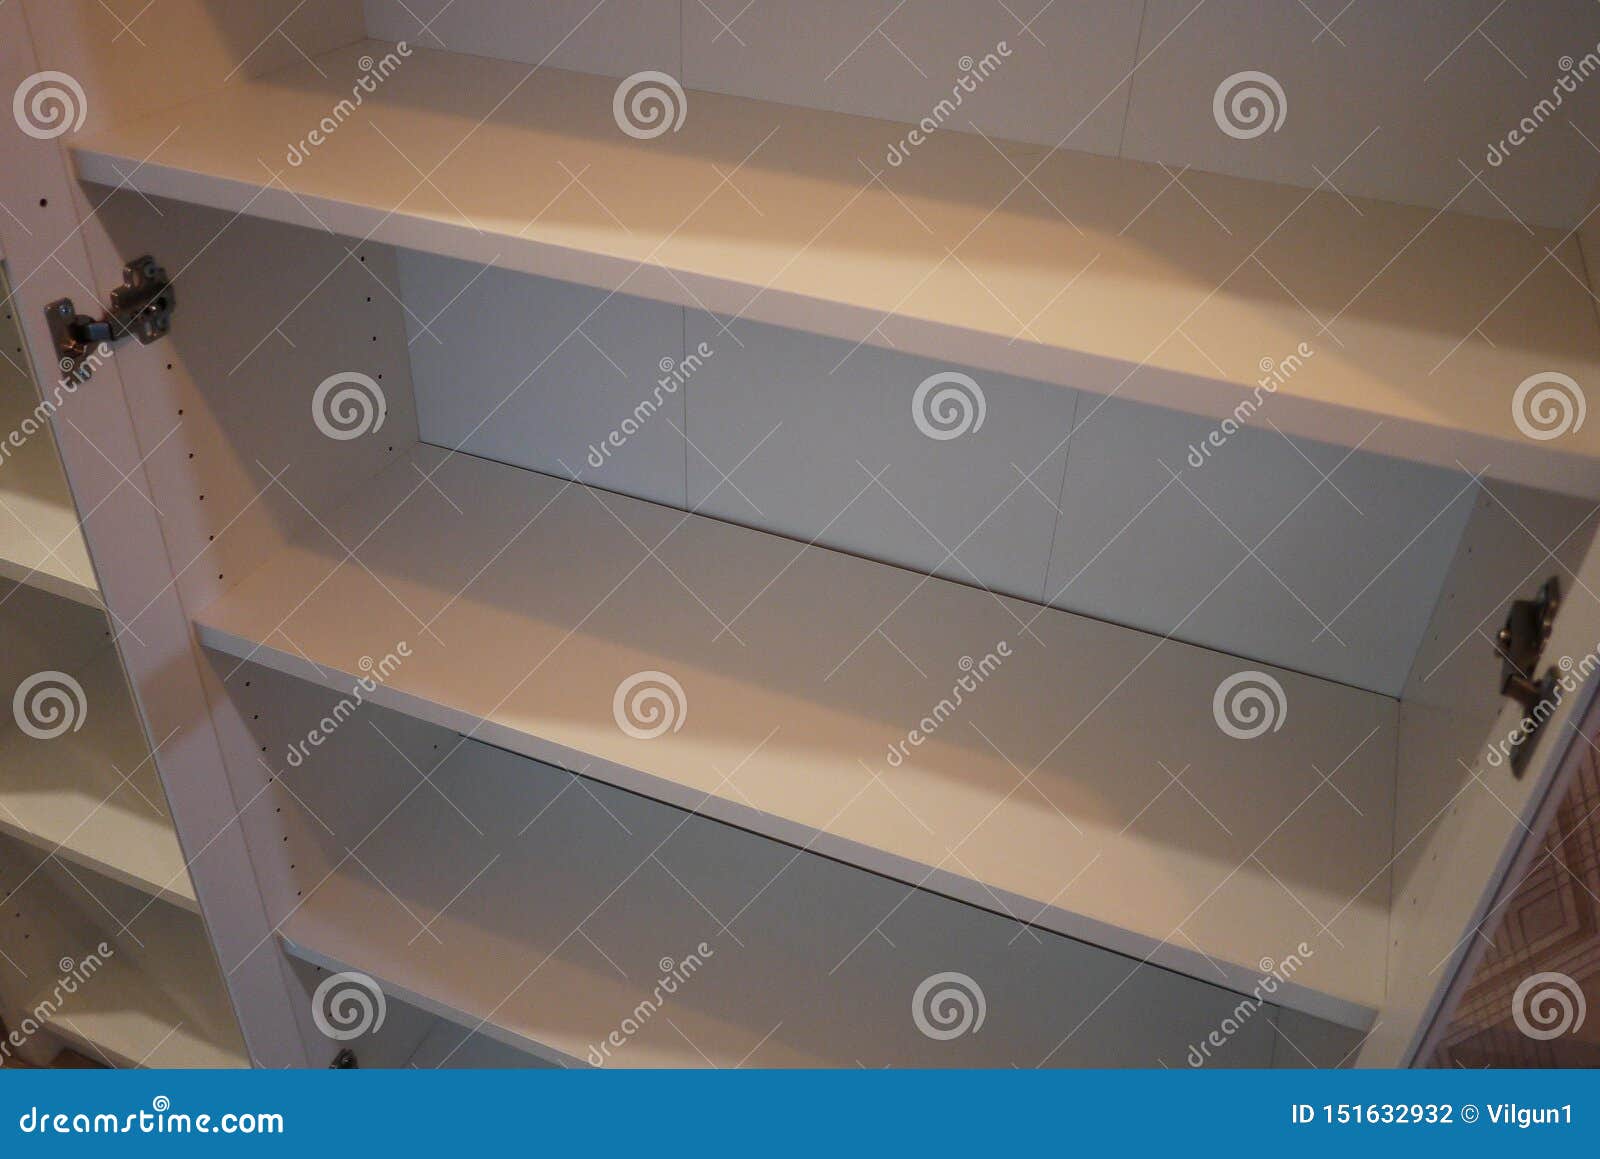 Bookcase In The Interior Of The Apartment Stock Photo Image Of